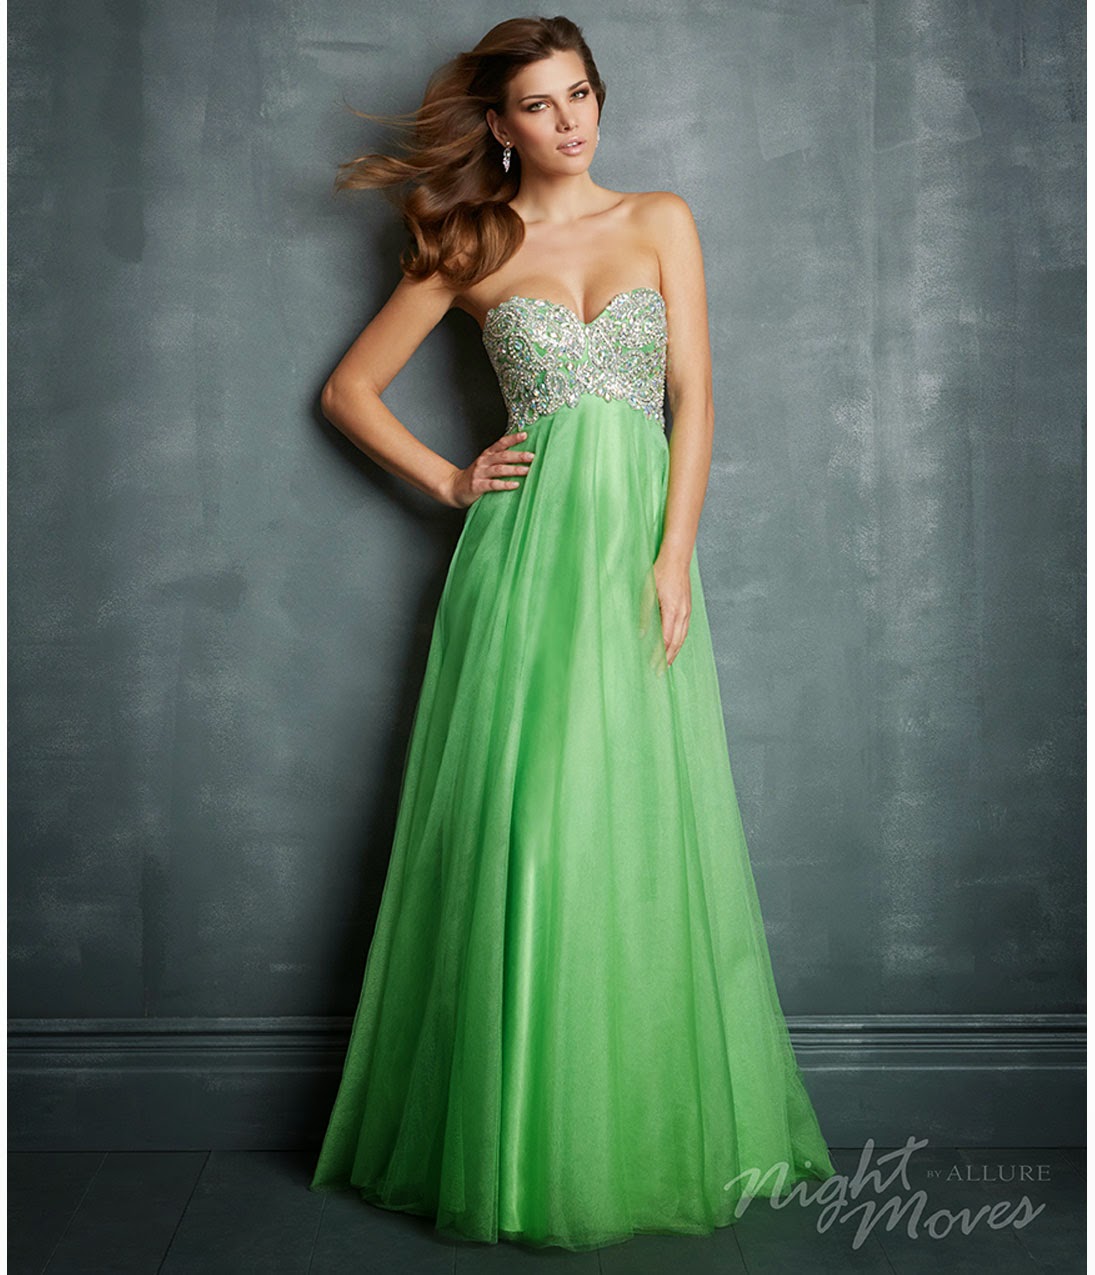 Emerald Green Prom Dresses Under 100 & Clothes Review